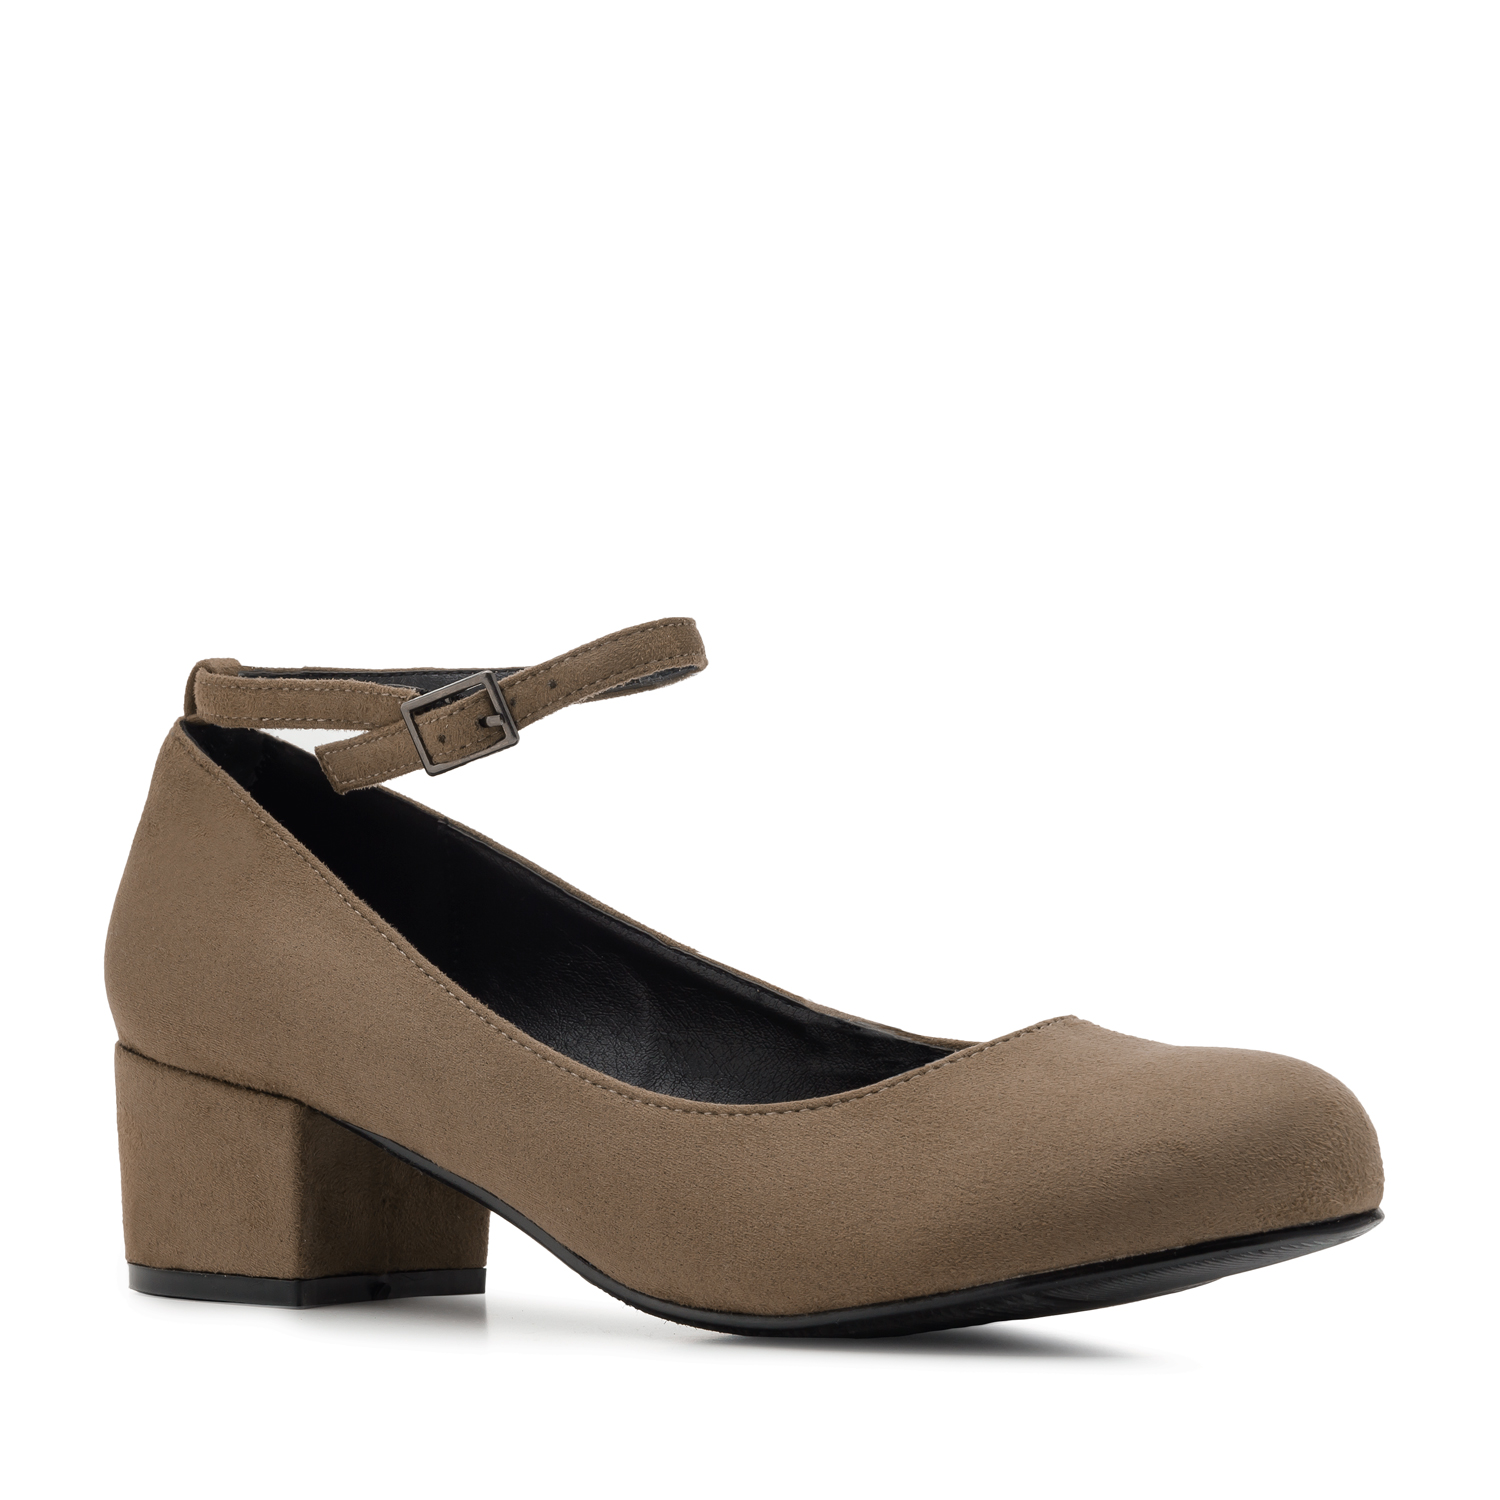 Ankle-Tie Shoes in Earth-coloured Suede 